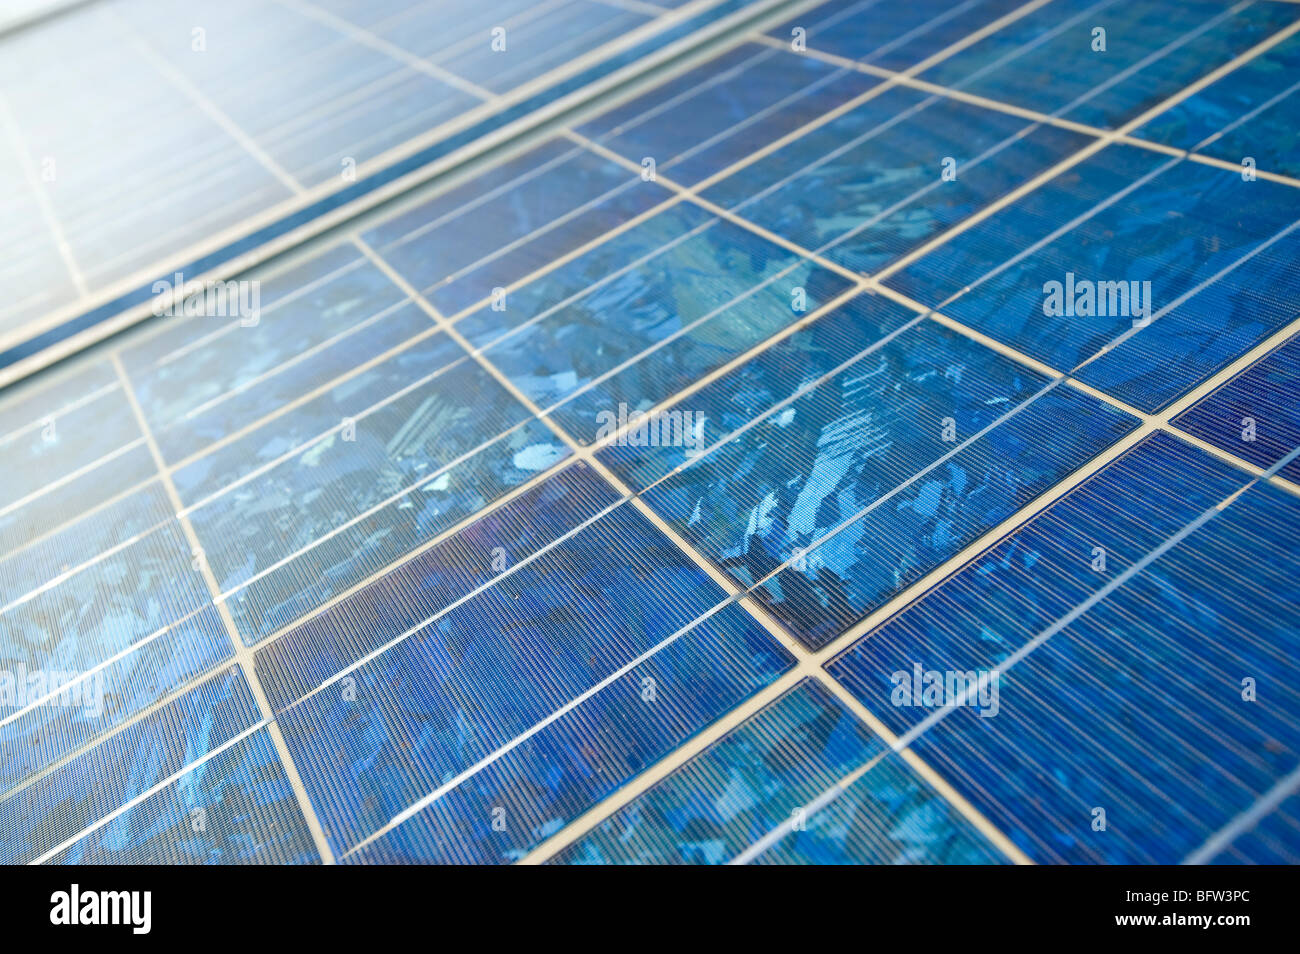 SOLAR electric panel power on a roof energy sun blue chip silizium silicon wafer silicium germany europe solar powered solar-pow Stock Photo